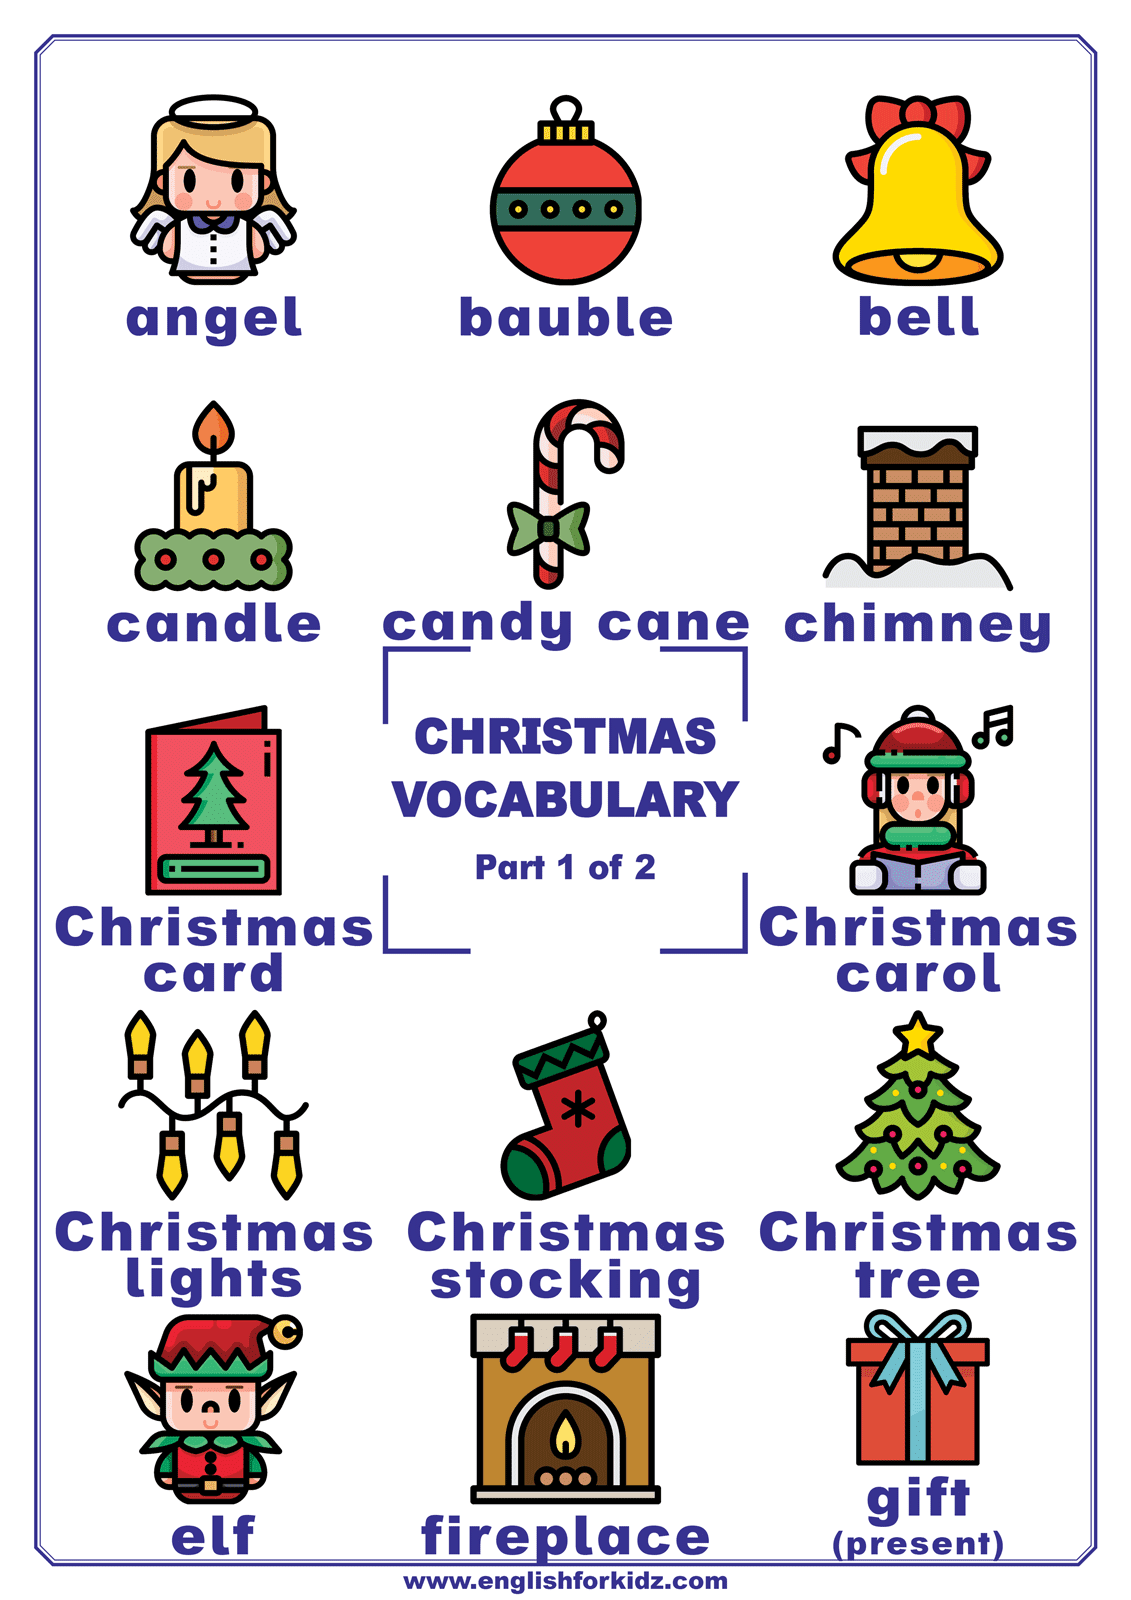 english-for-kids-step-by-step-vocabulary-posters-for-20-topics